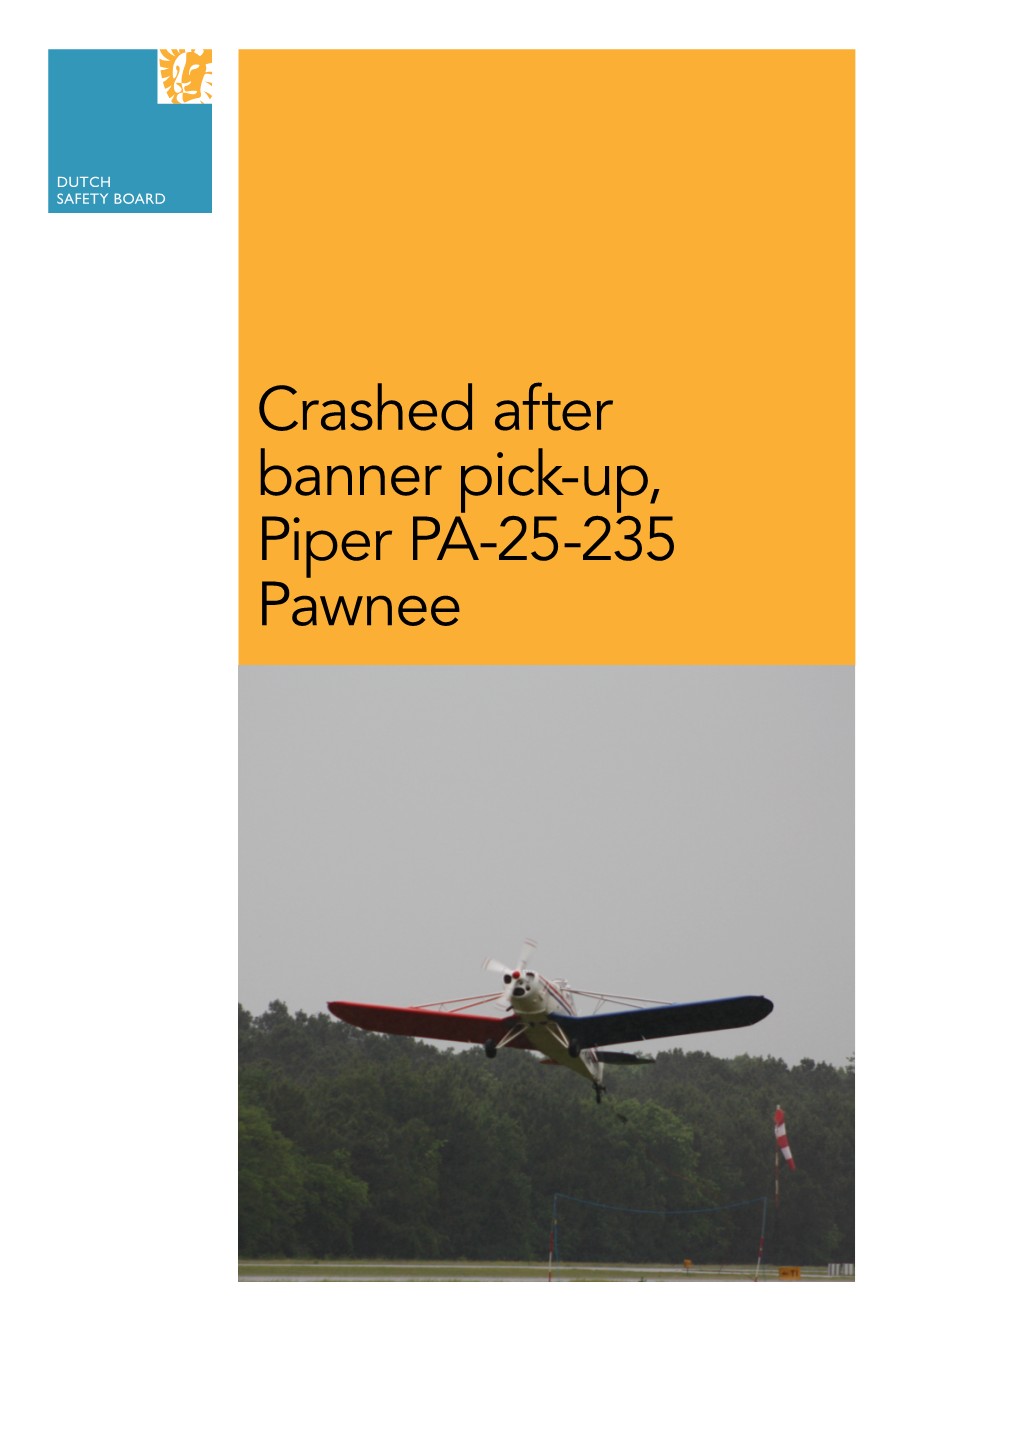 Crashed After Banner Pick-Up, Piper PA-25-235 Pawnee Crashed After Banner Pick-Up, Piper PA-25-235 Pawnee